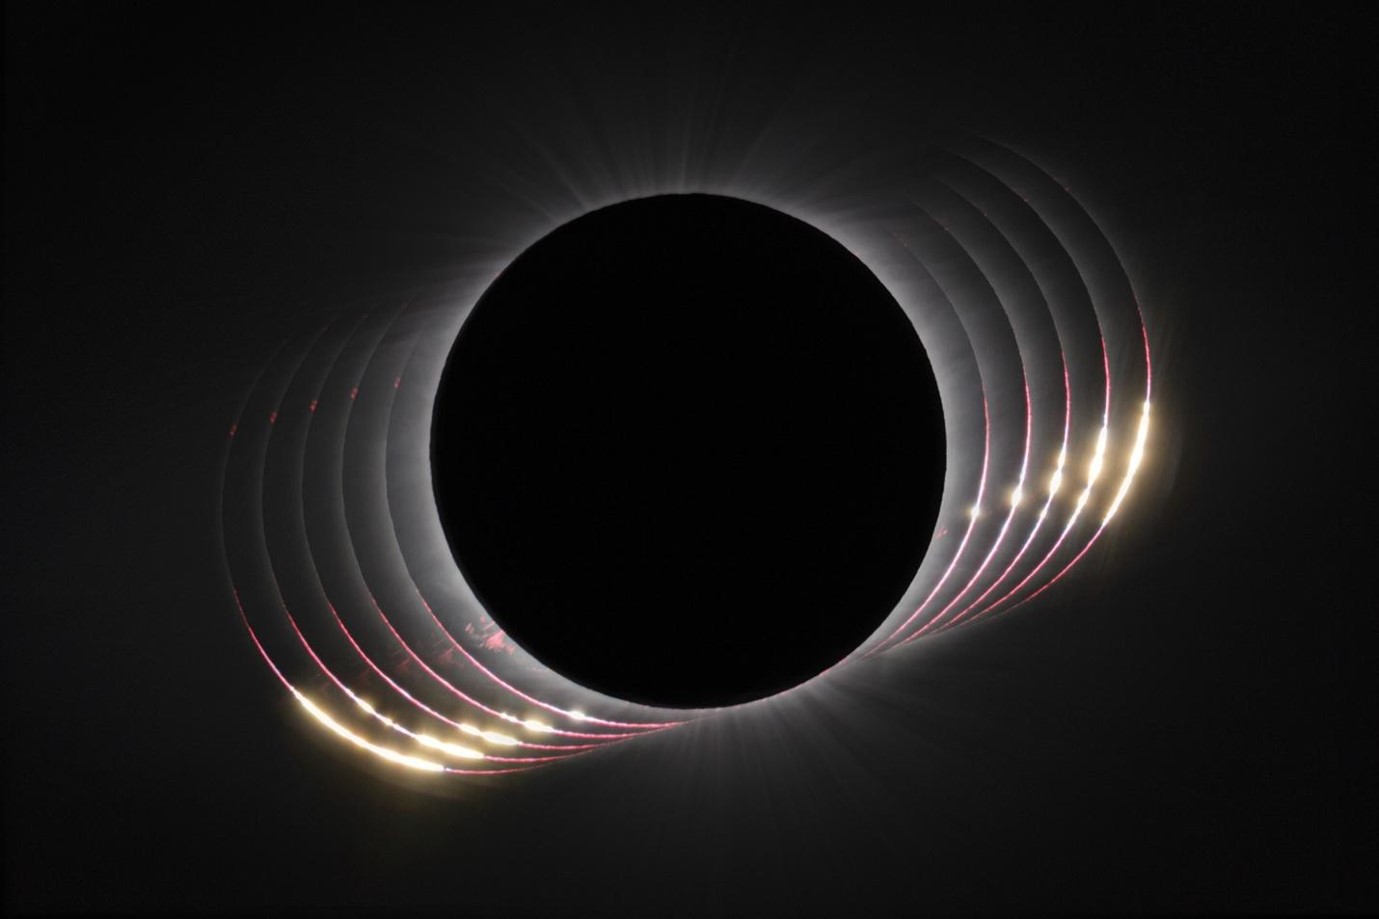 Total eclipse image with Baily's beads